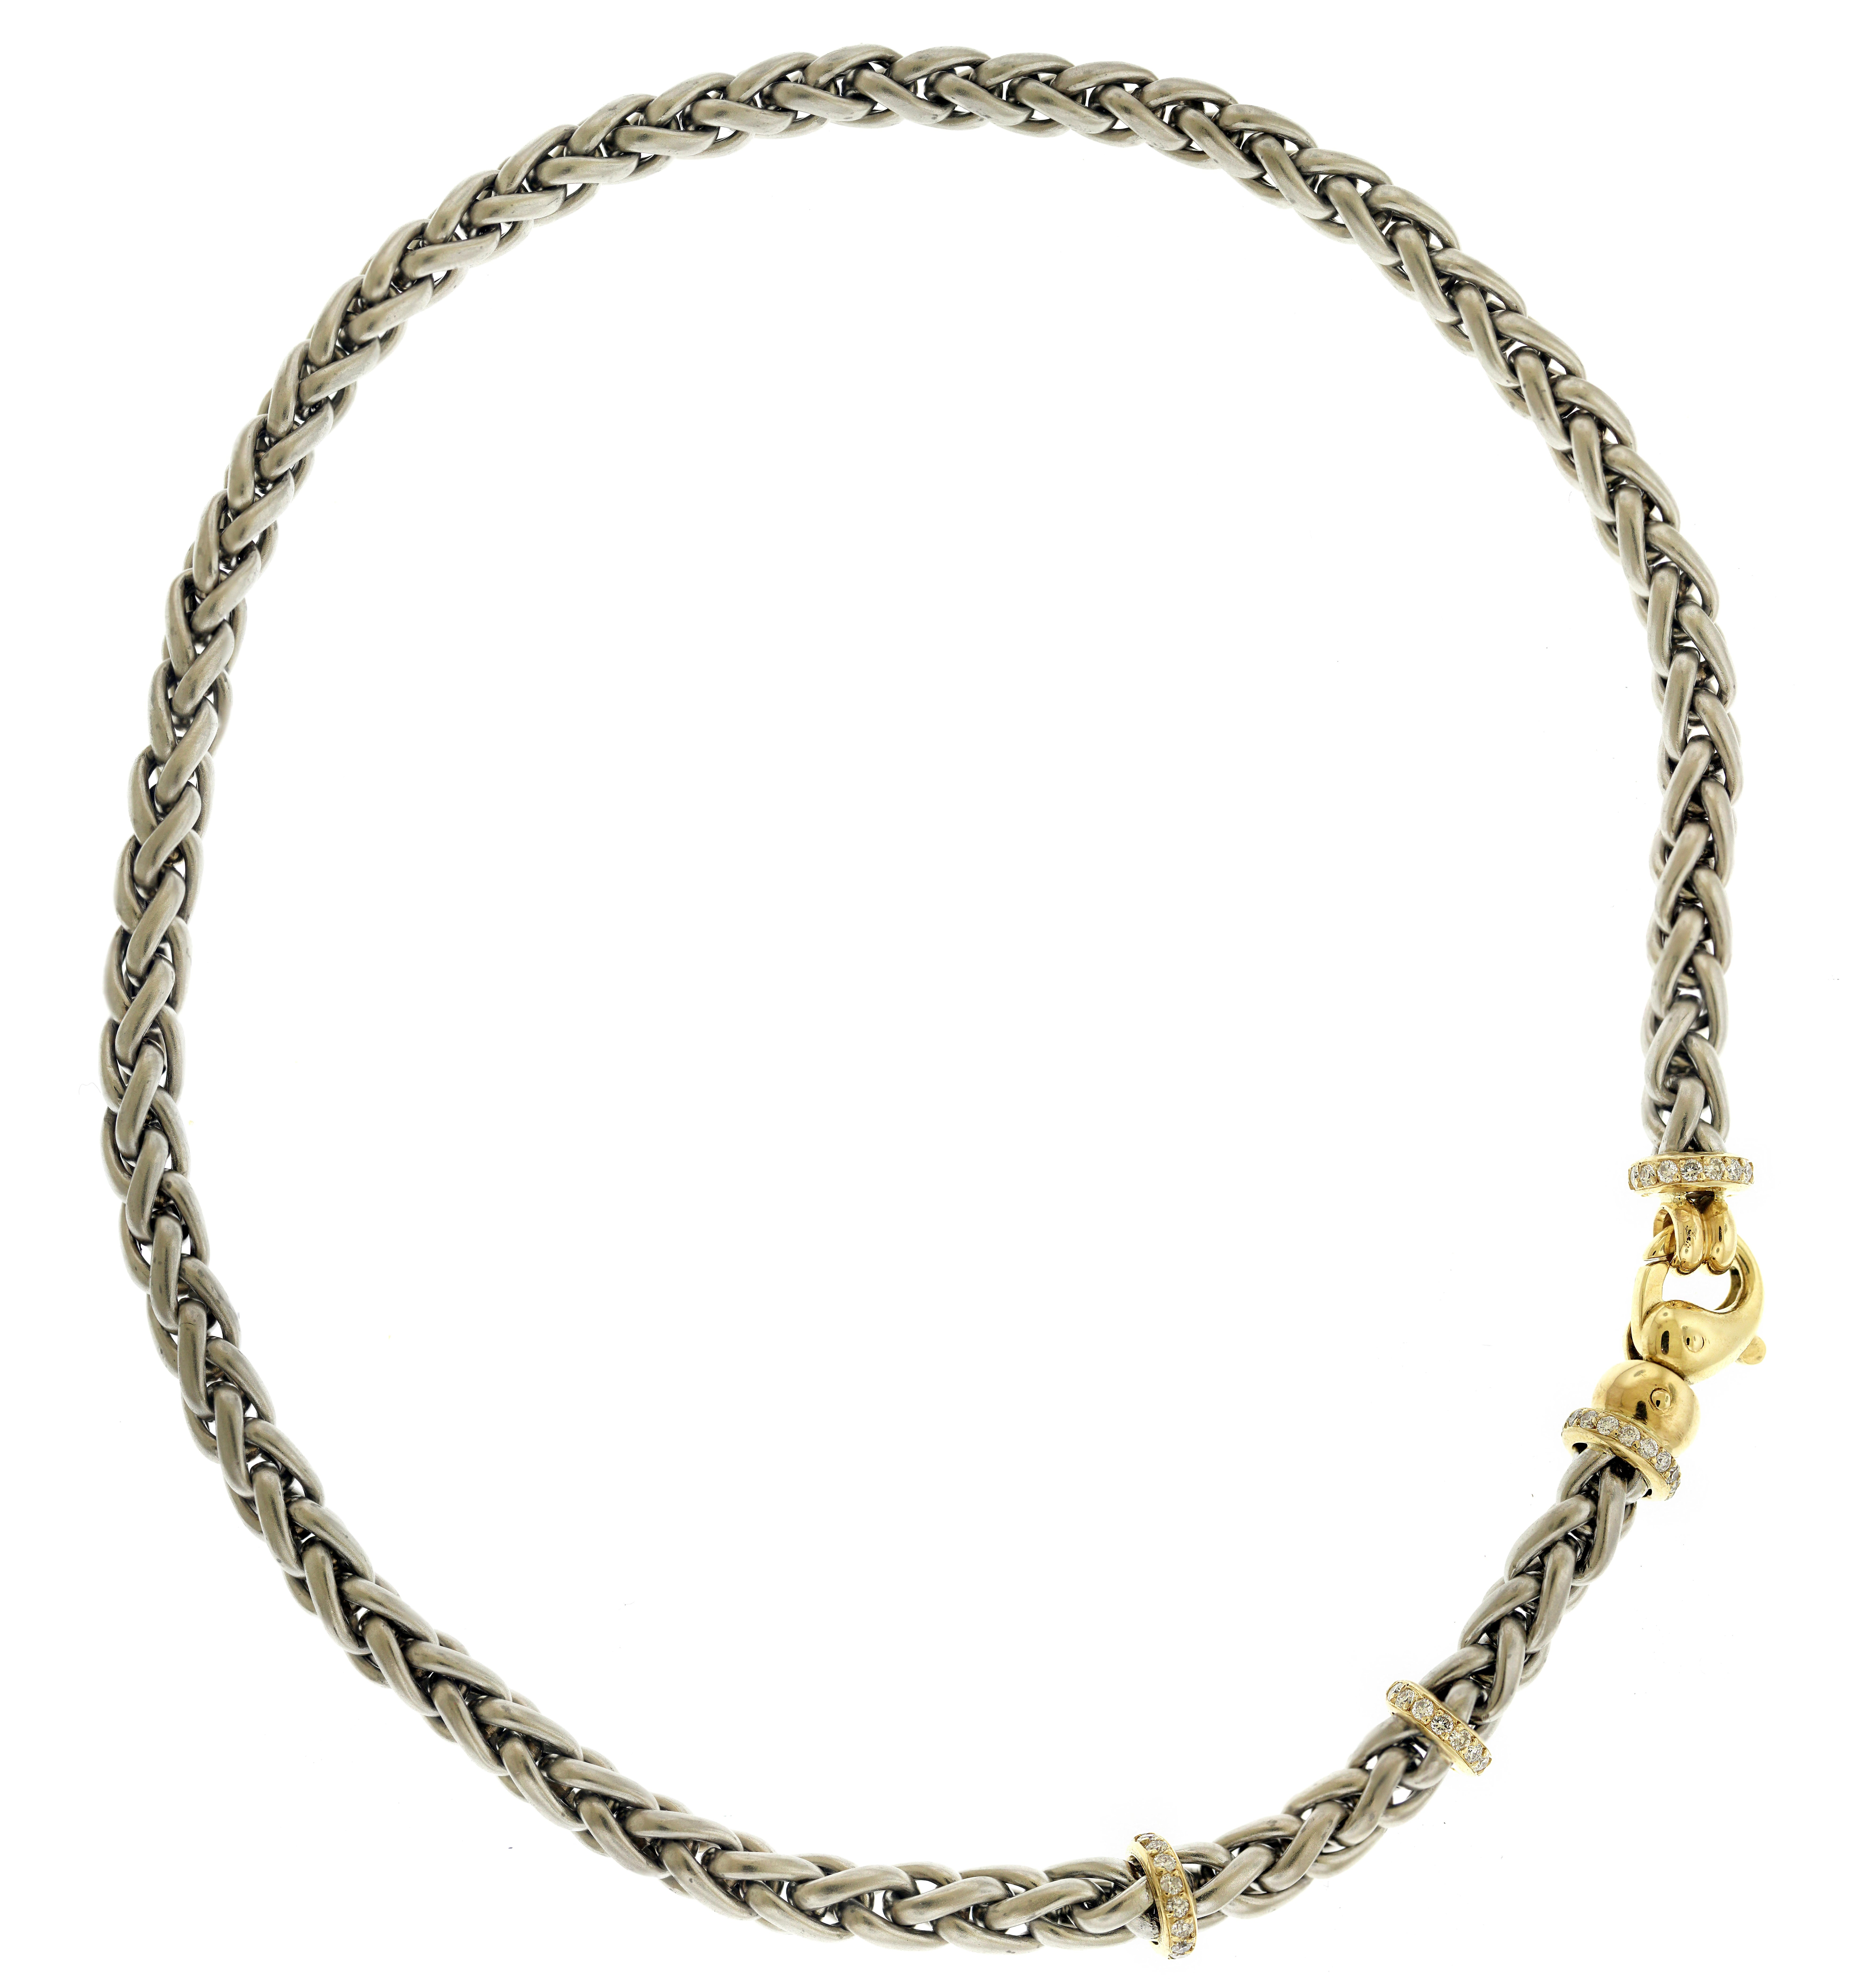 Women's Platinum and 18 Karat Yellow Gold Chain Necklace with Diamond Lobster Clasp